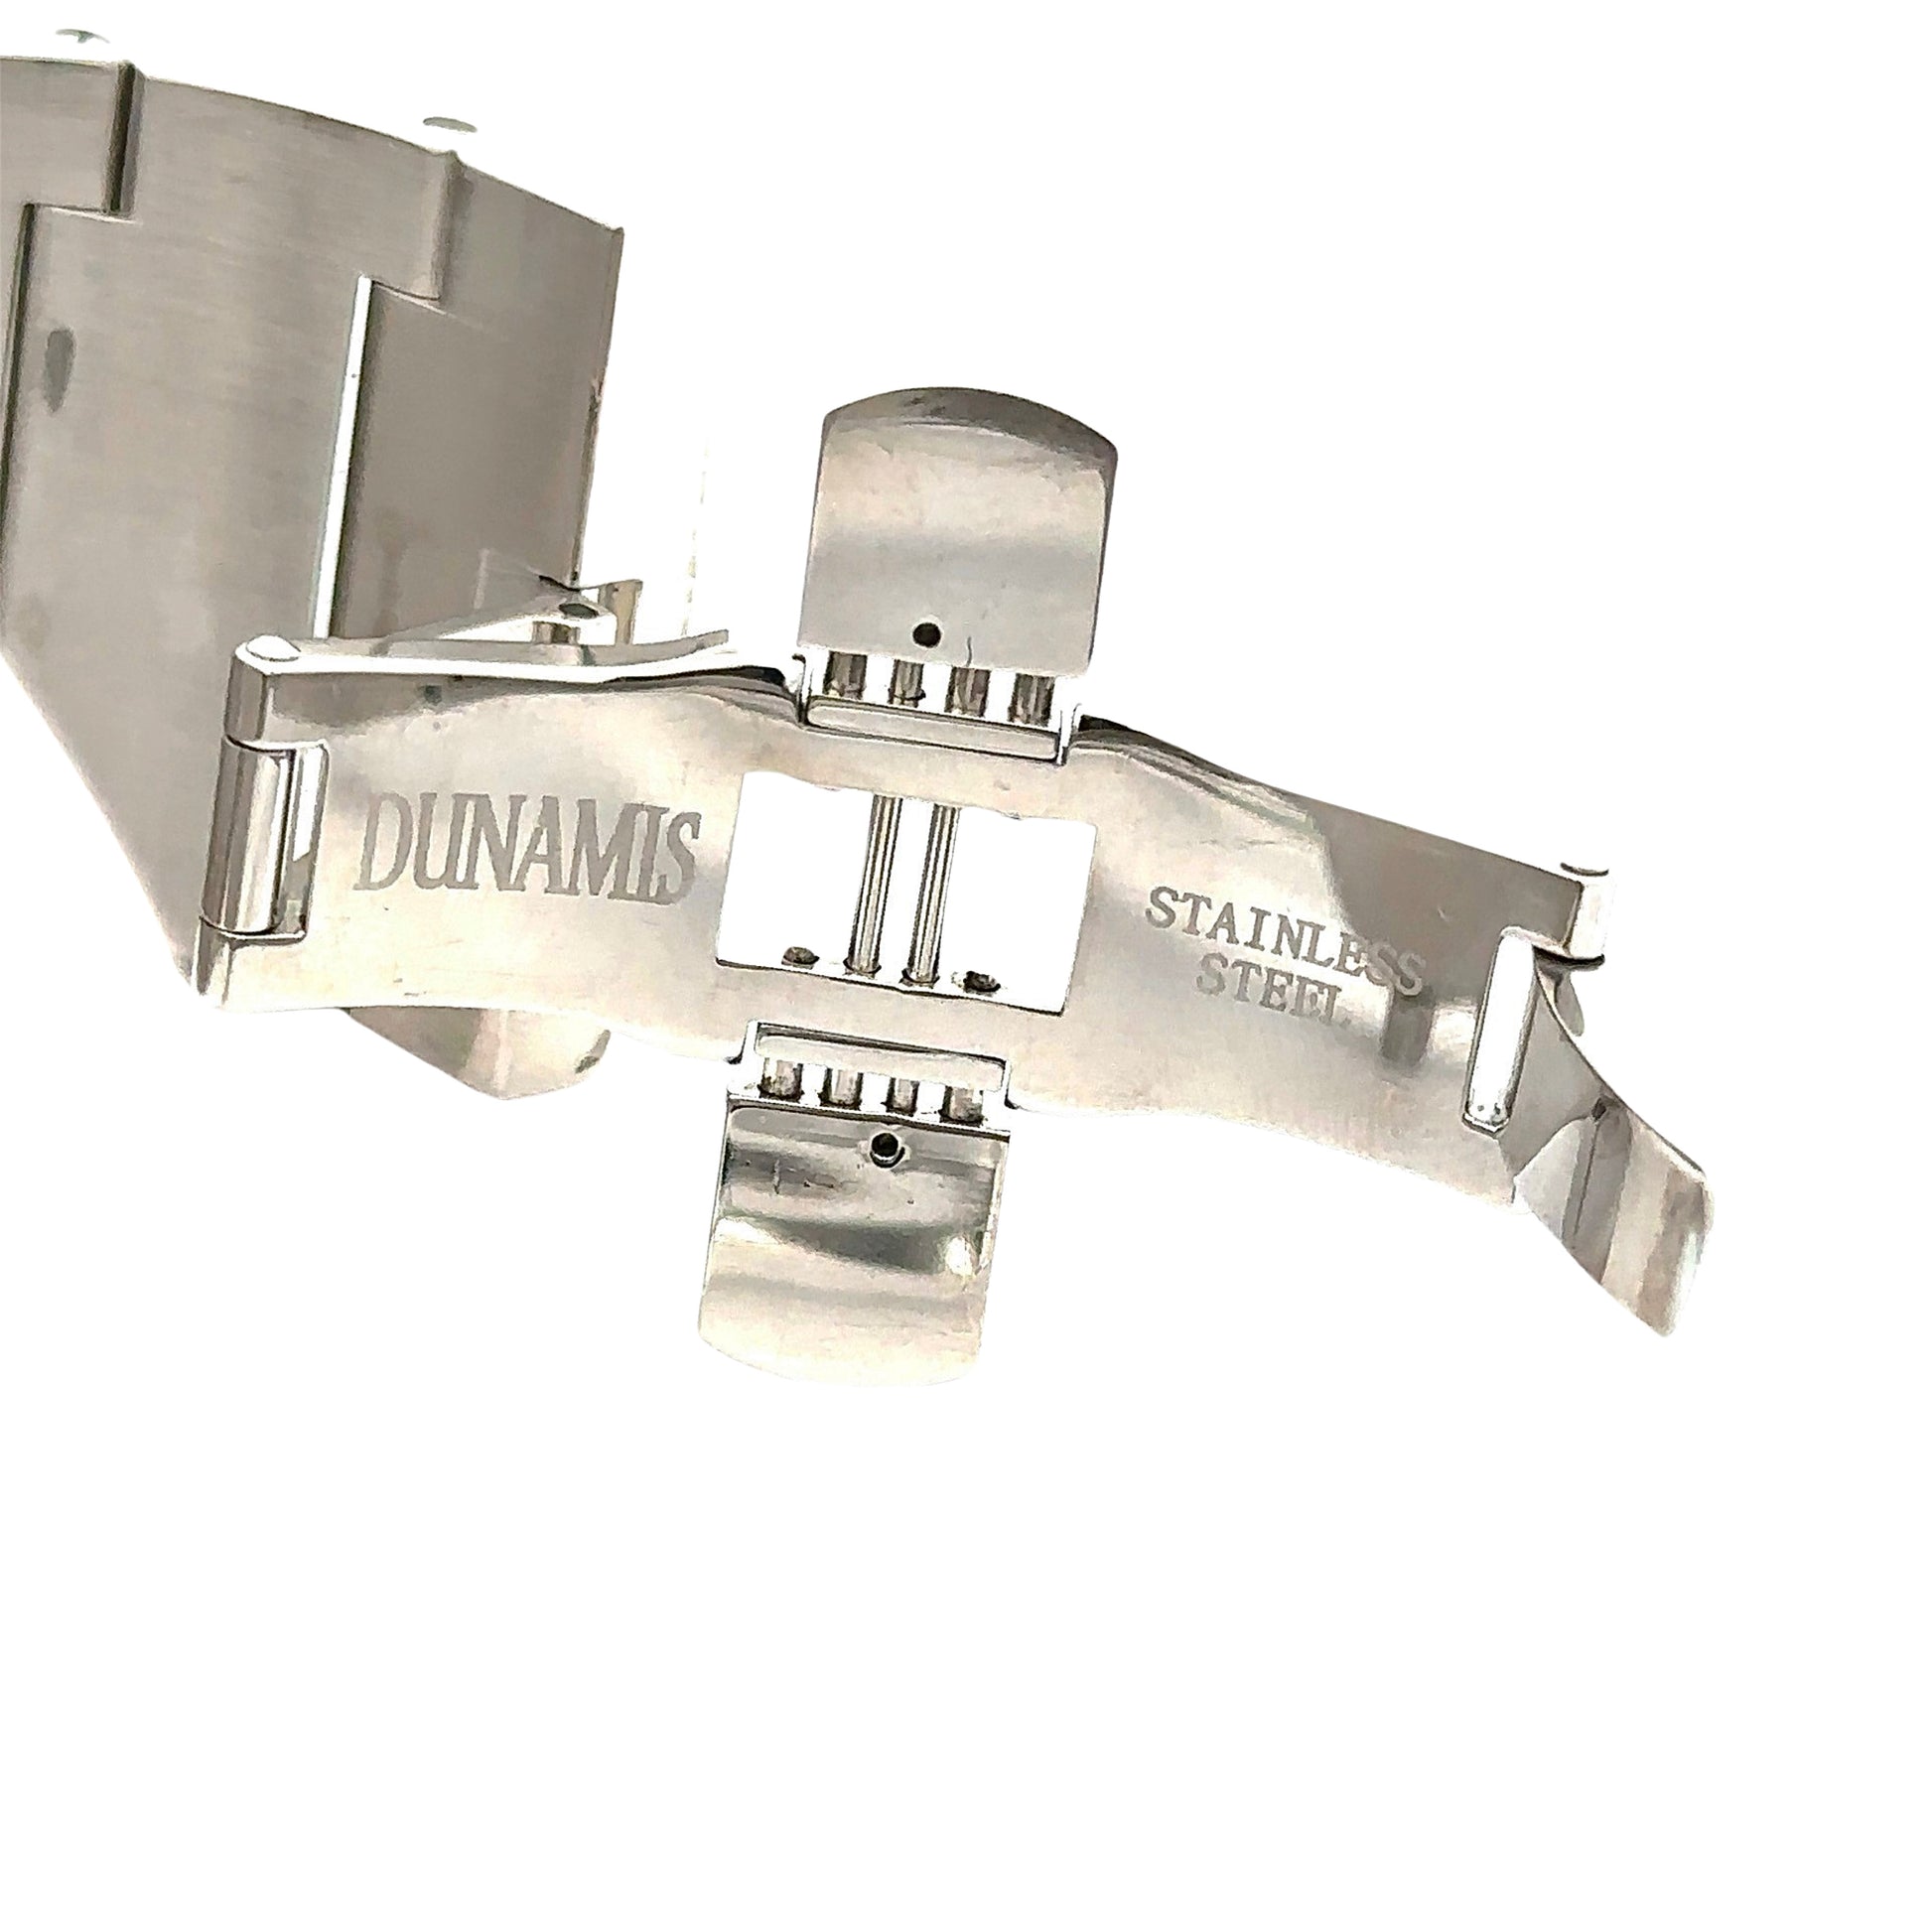 Inside Dunamis clasp with "Dunamis" "Stainless Steel"